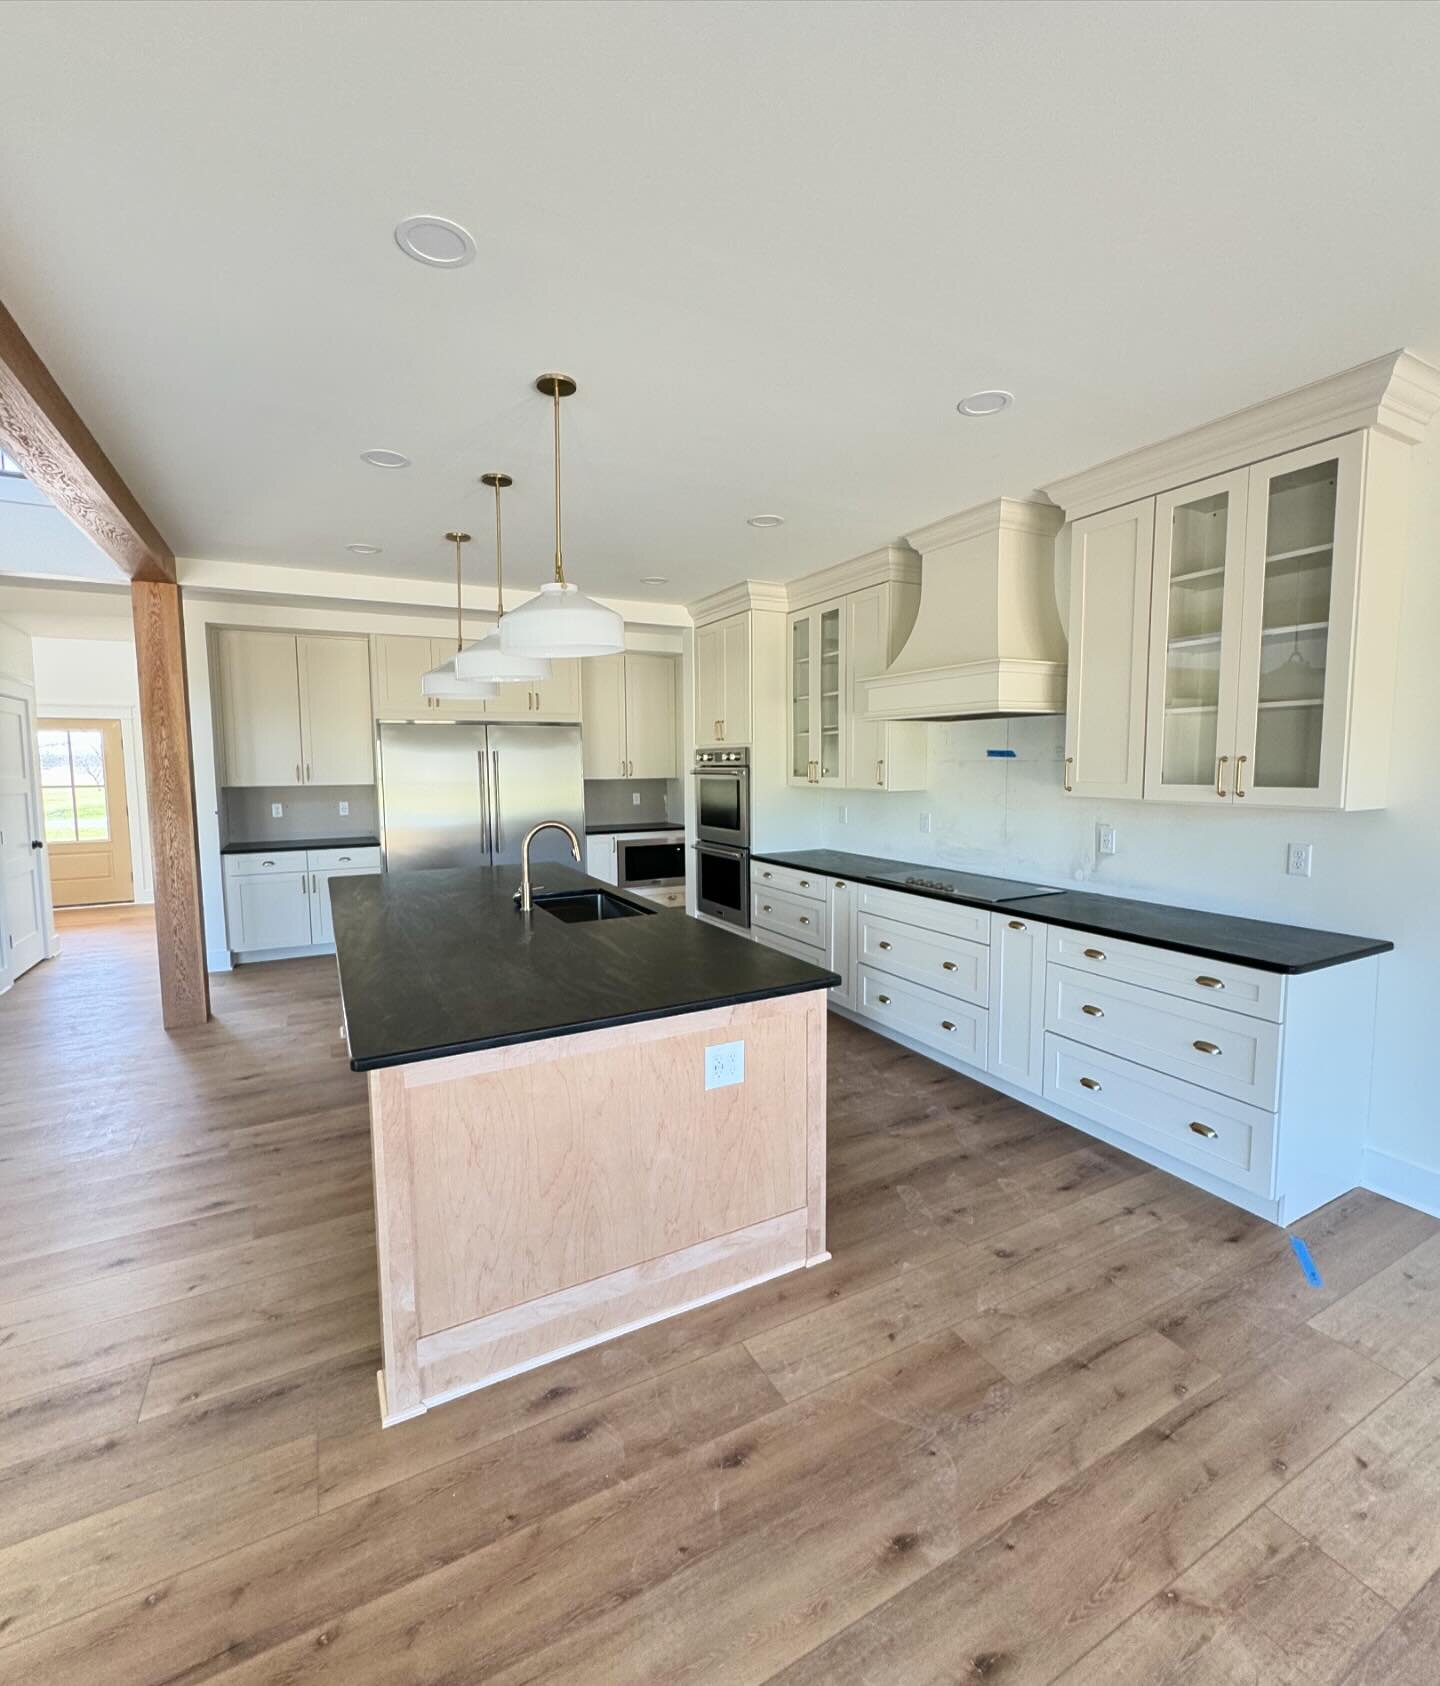 This custom home project in Milton, DE is nearing completion, and it&rsquo;s shaping up beautifully! Soon, we&rsquo;ll be handing over the keys to its wonderful owners. 🎉 Check out these sneak peek progress shots for a glimpse of what&rsquo;s to com